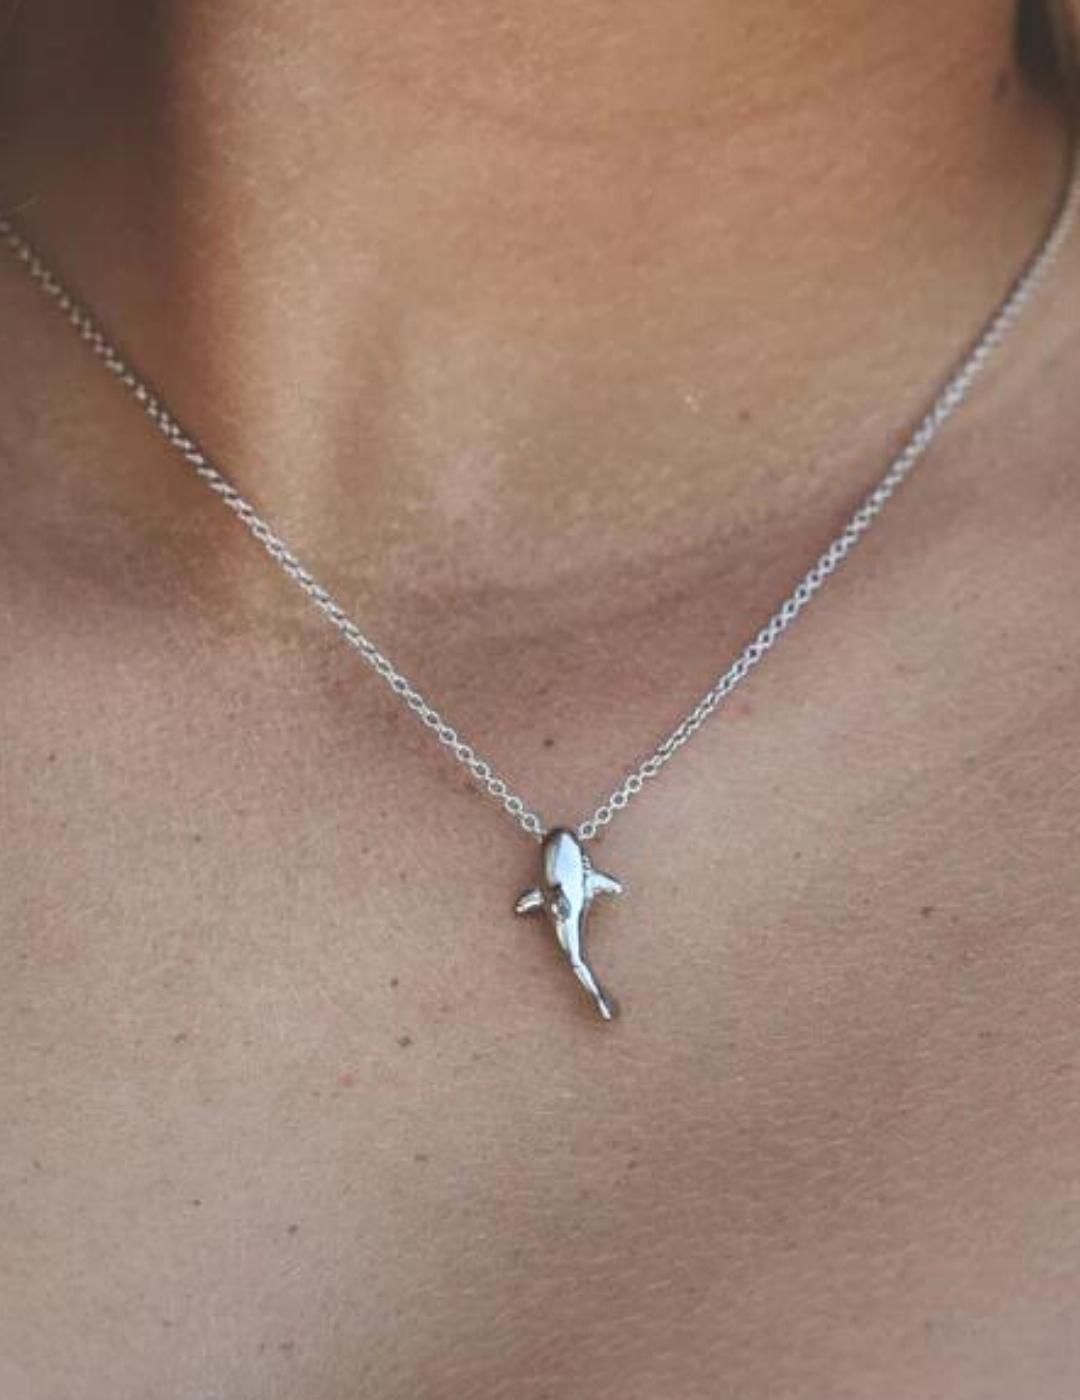 Shark necklace sea lovers would love